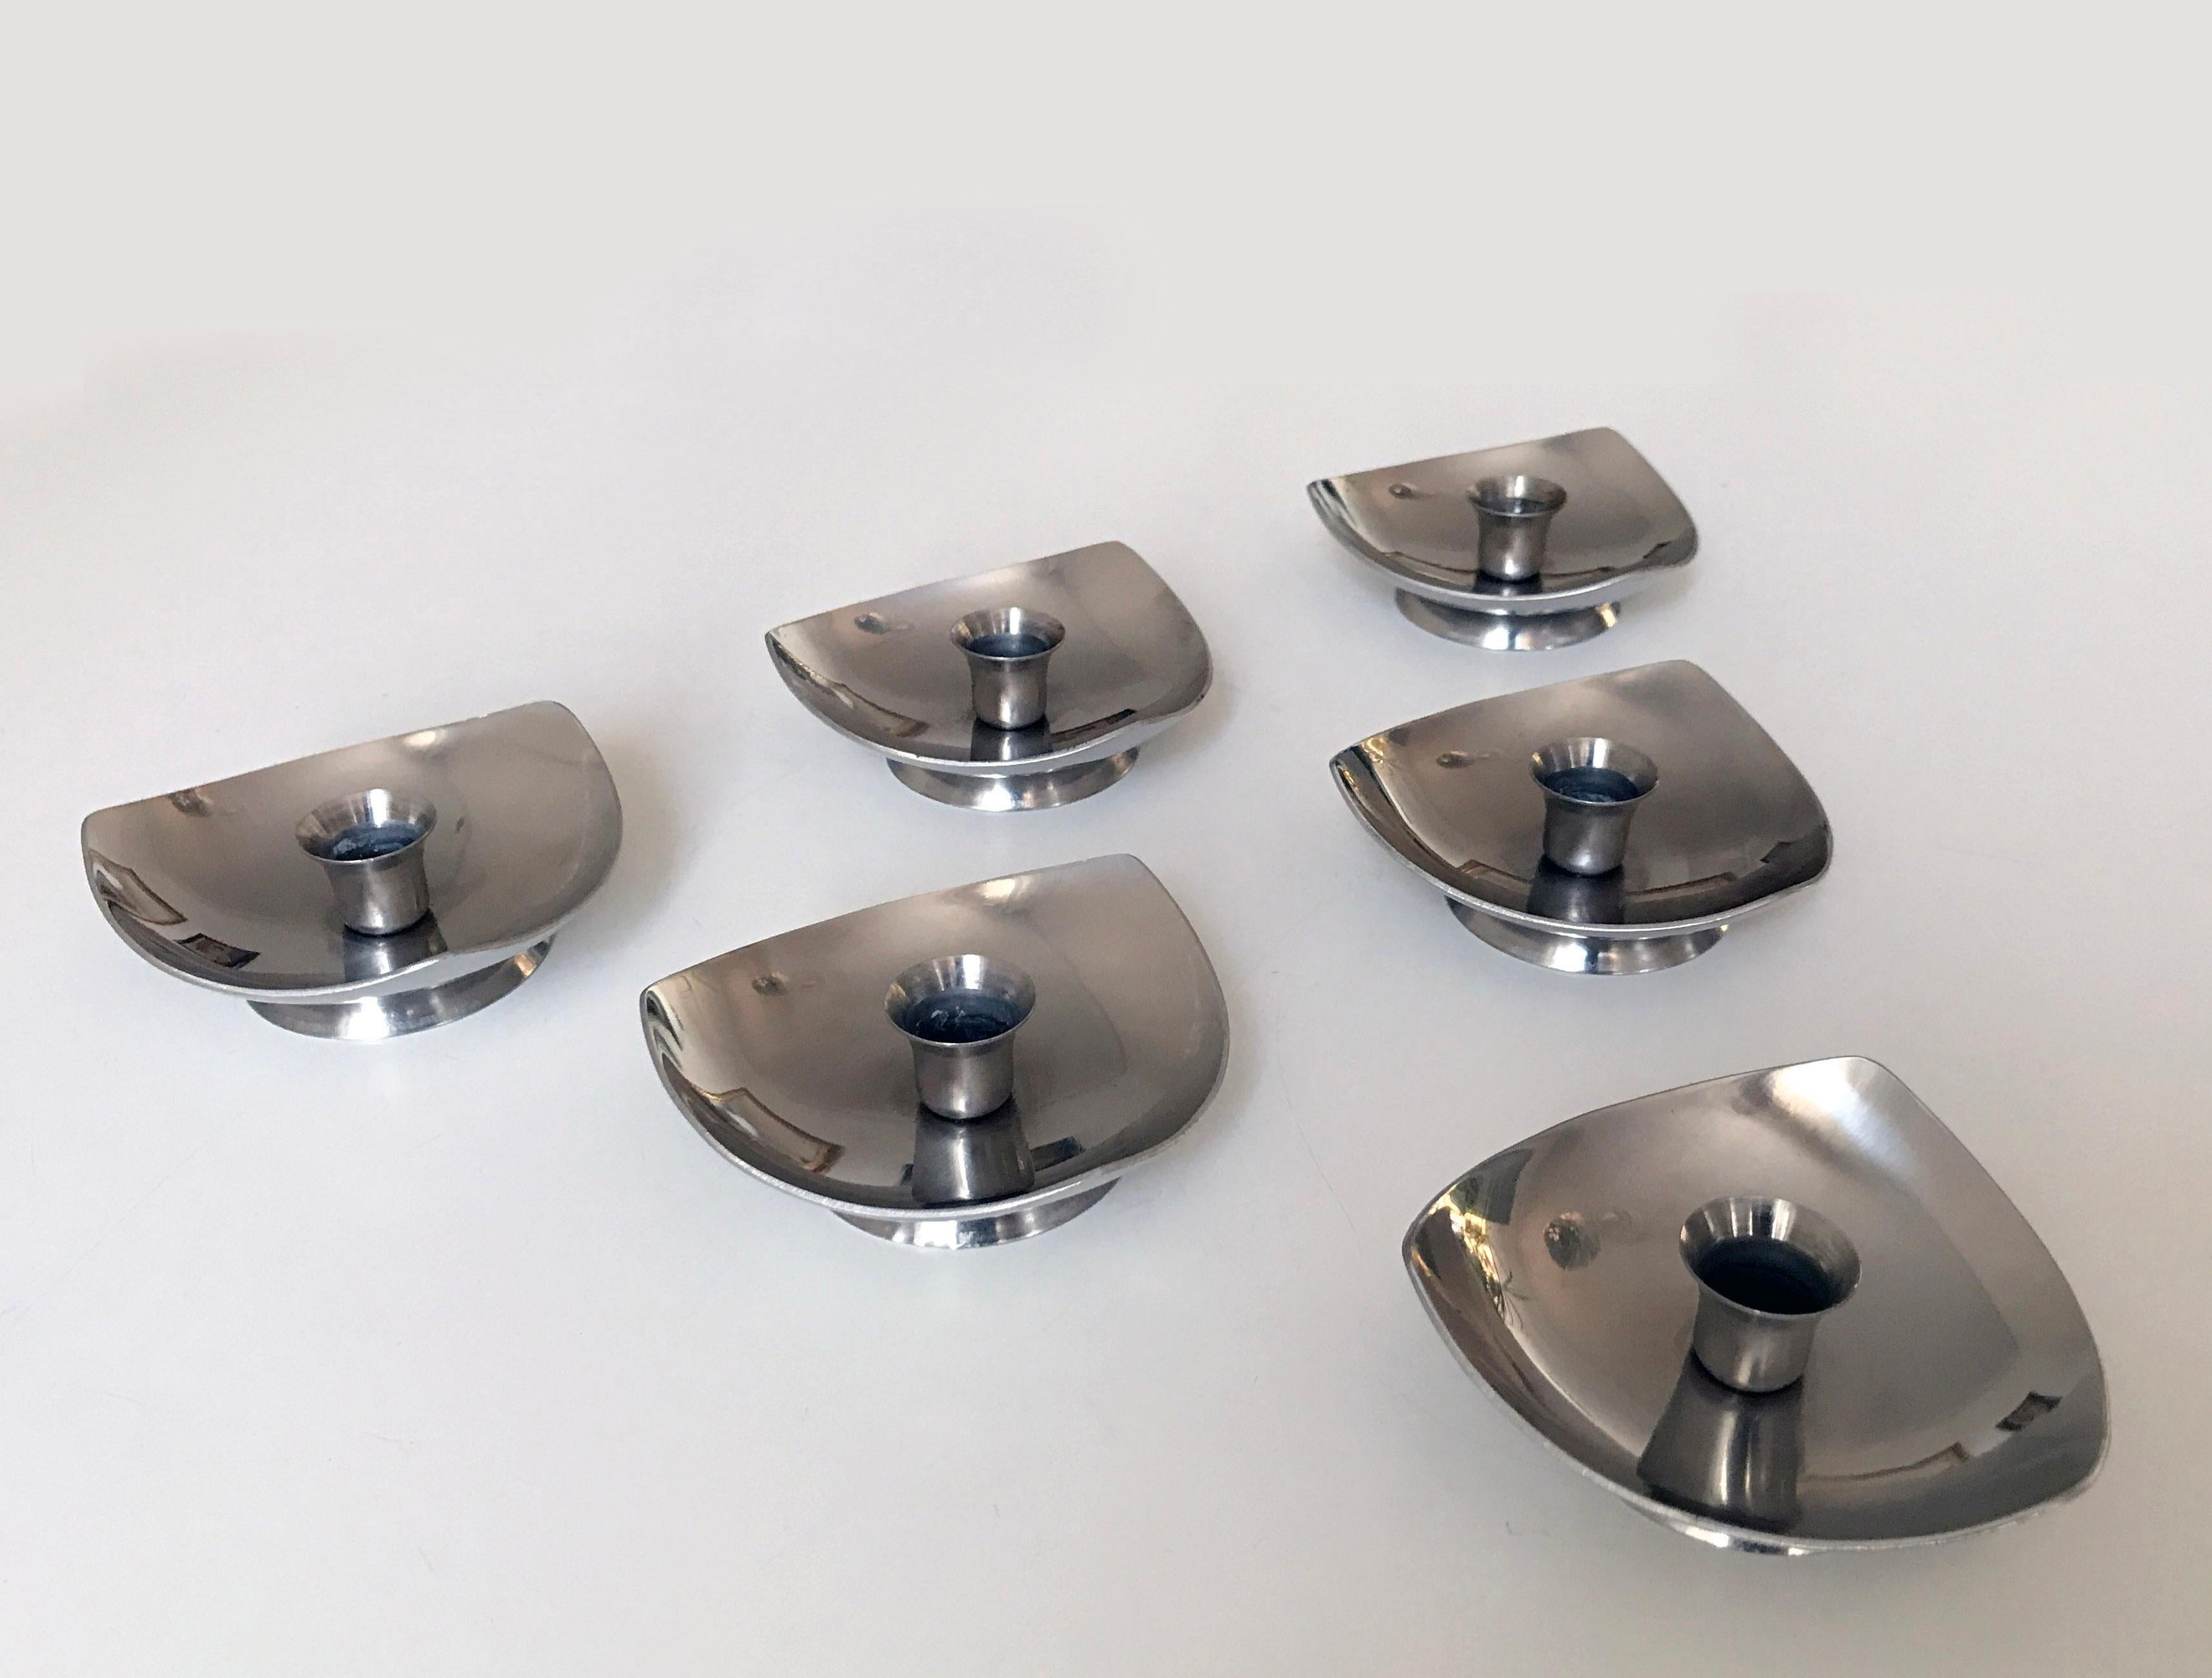 FREE SHIPPING! Mid-Century Set of six Selandia Danish design stainless steel candleholders made in 18/8 stainless steel. FREE SHIPPING! The brand Selandia made a lot of different serving and decoration items during the 1950s-1960s such as trays,